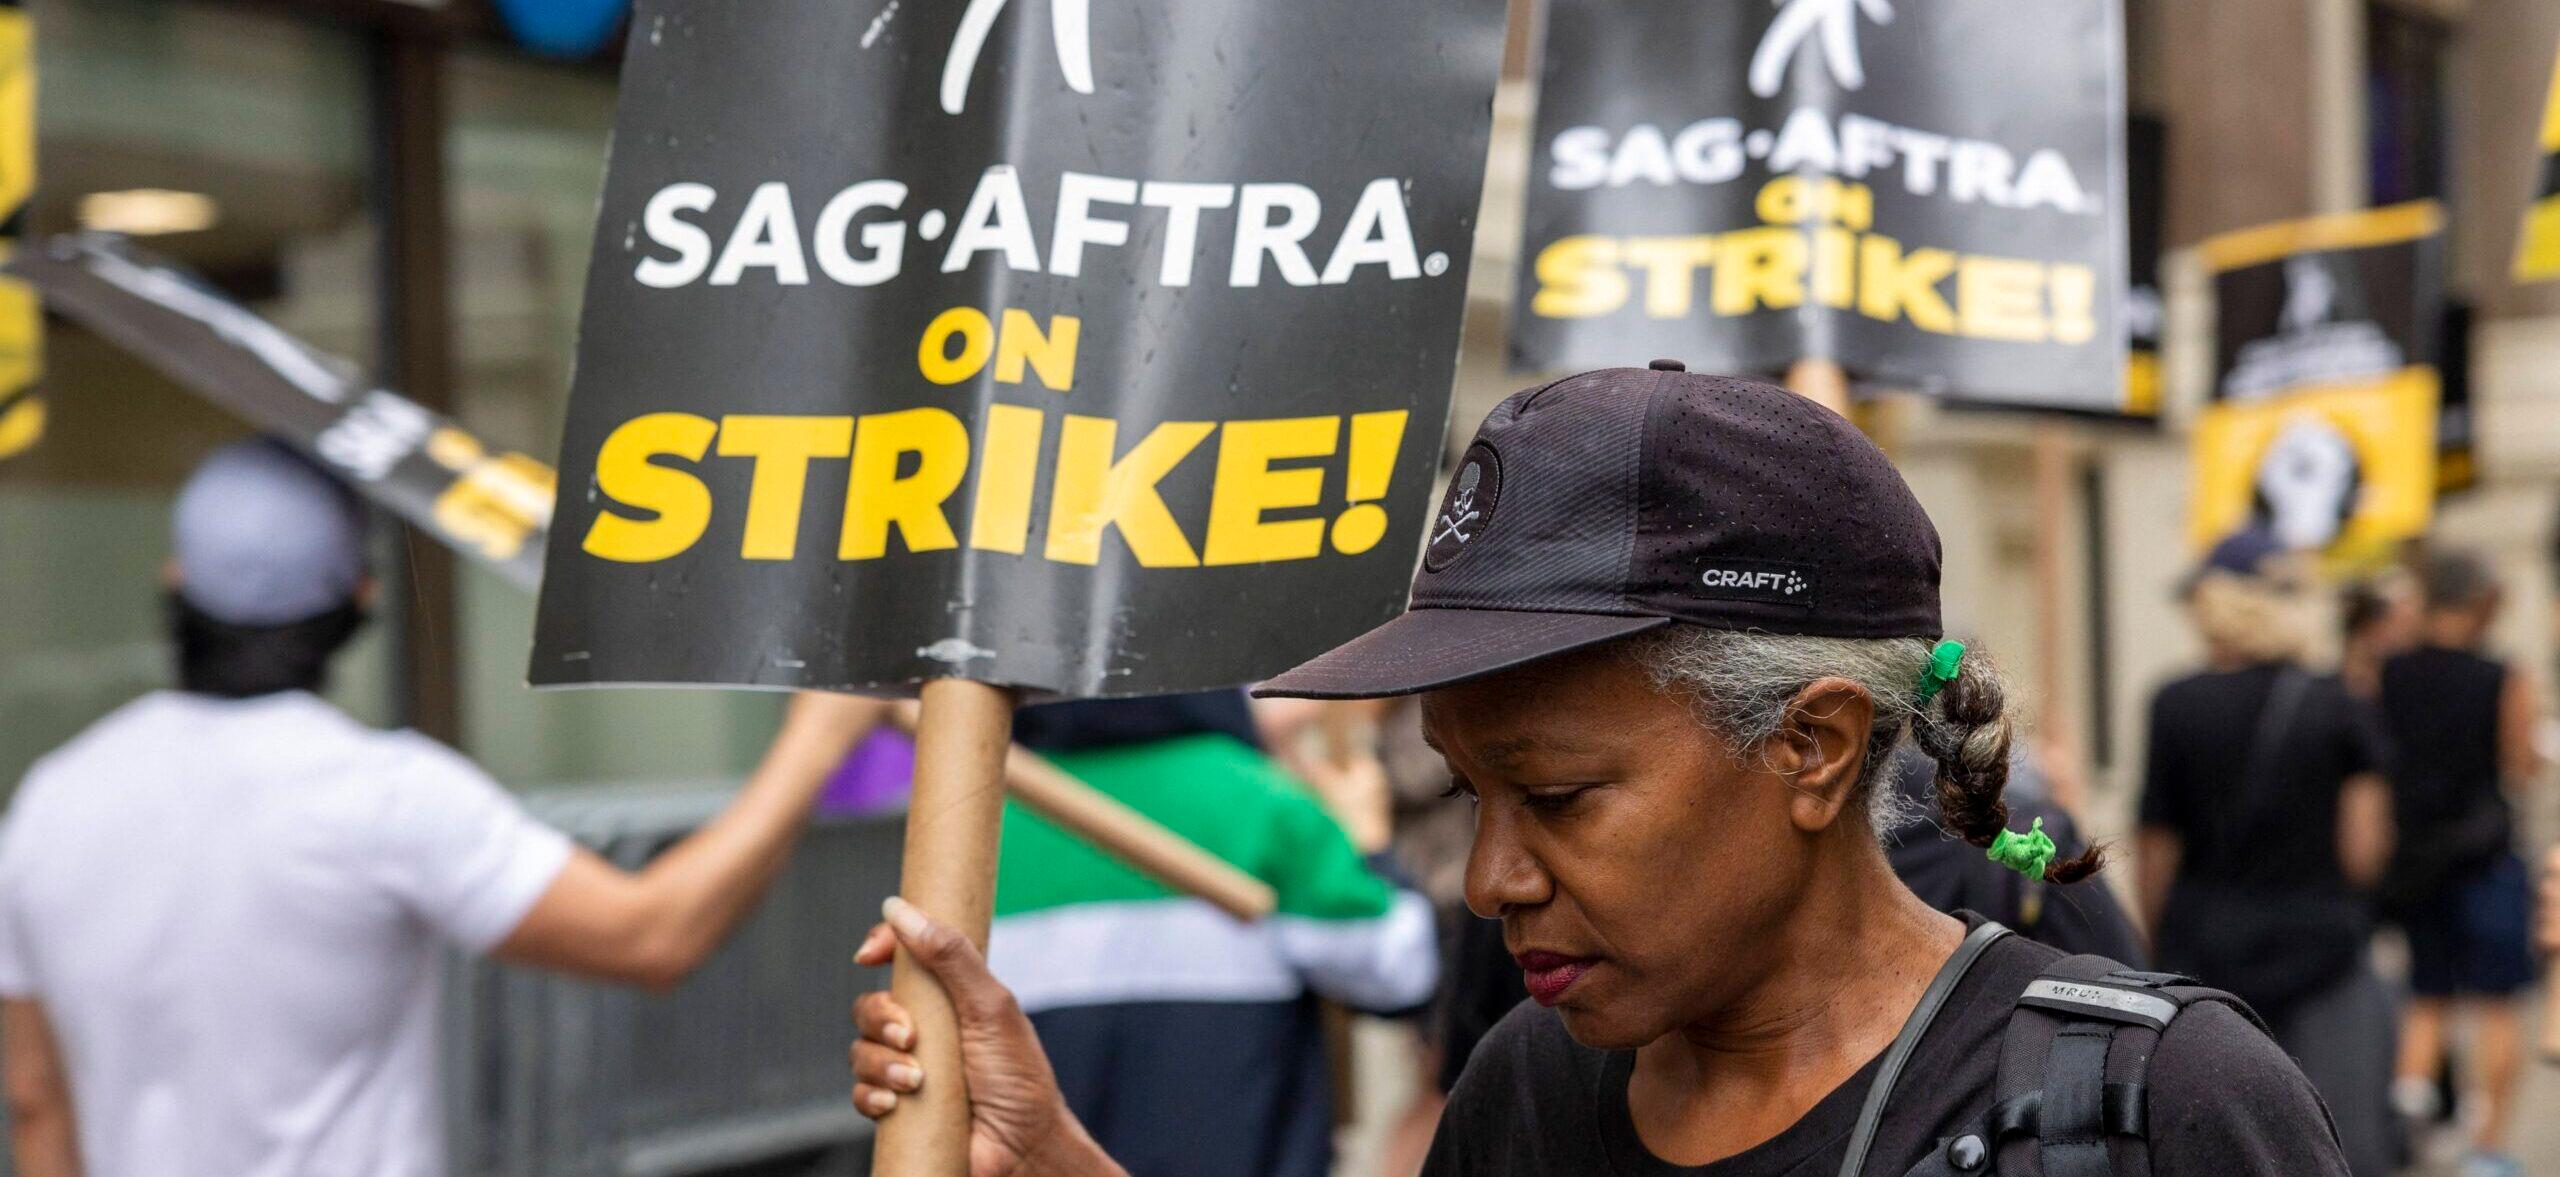 SAG-AFTRA Cancels Friday The 13th Picketing Due To ‘Potential Safety Concerns’